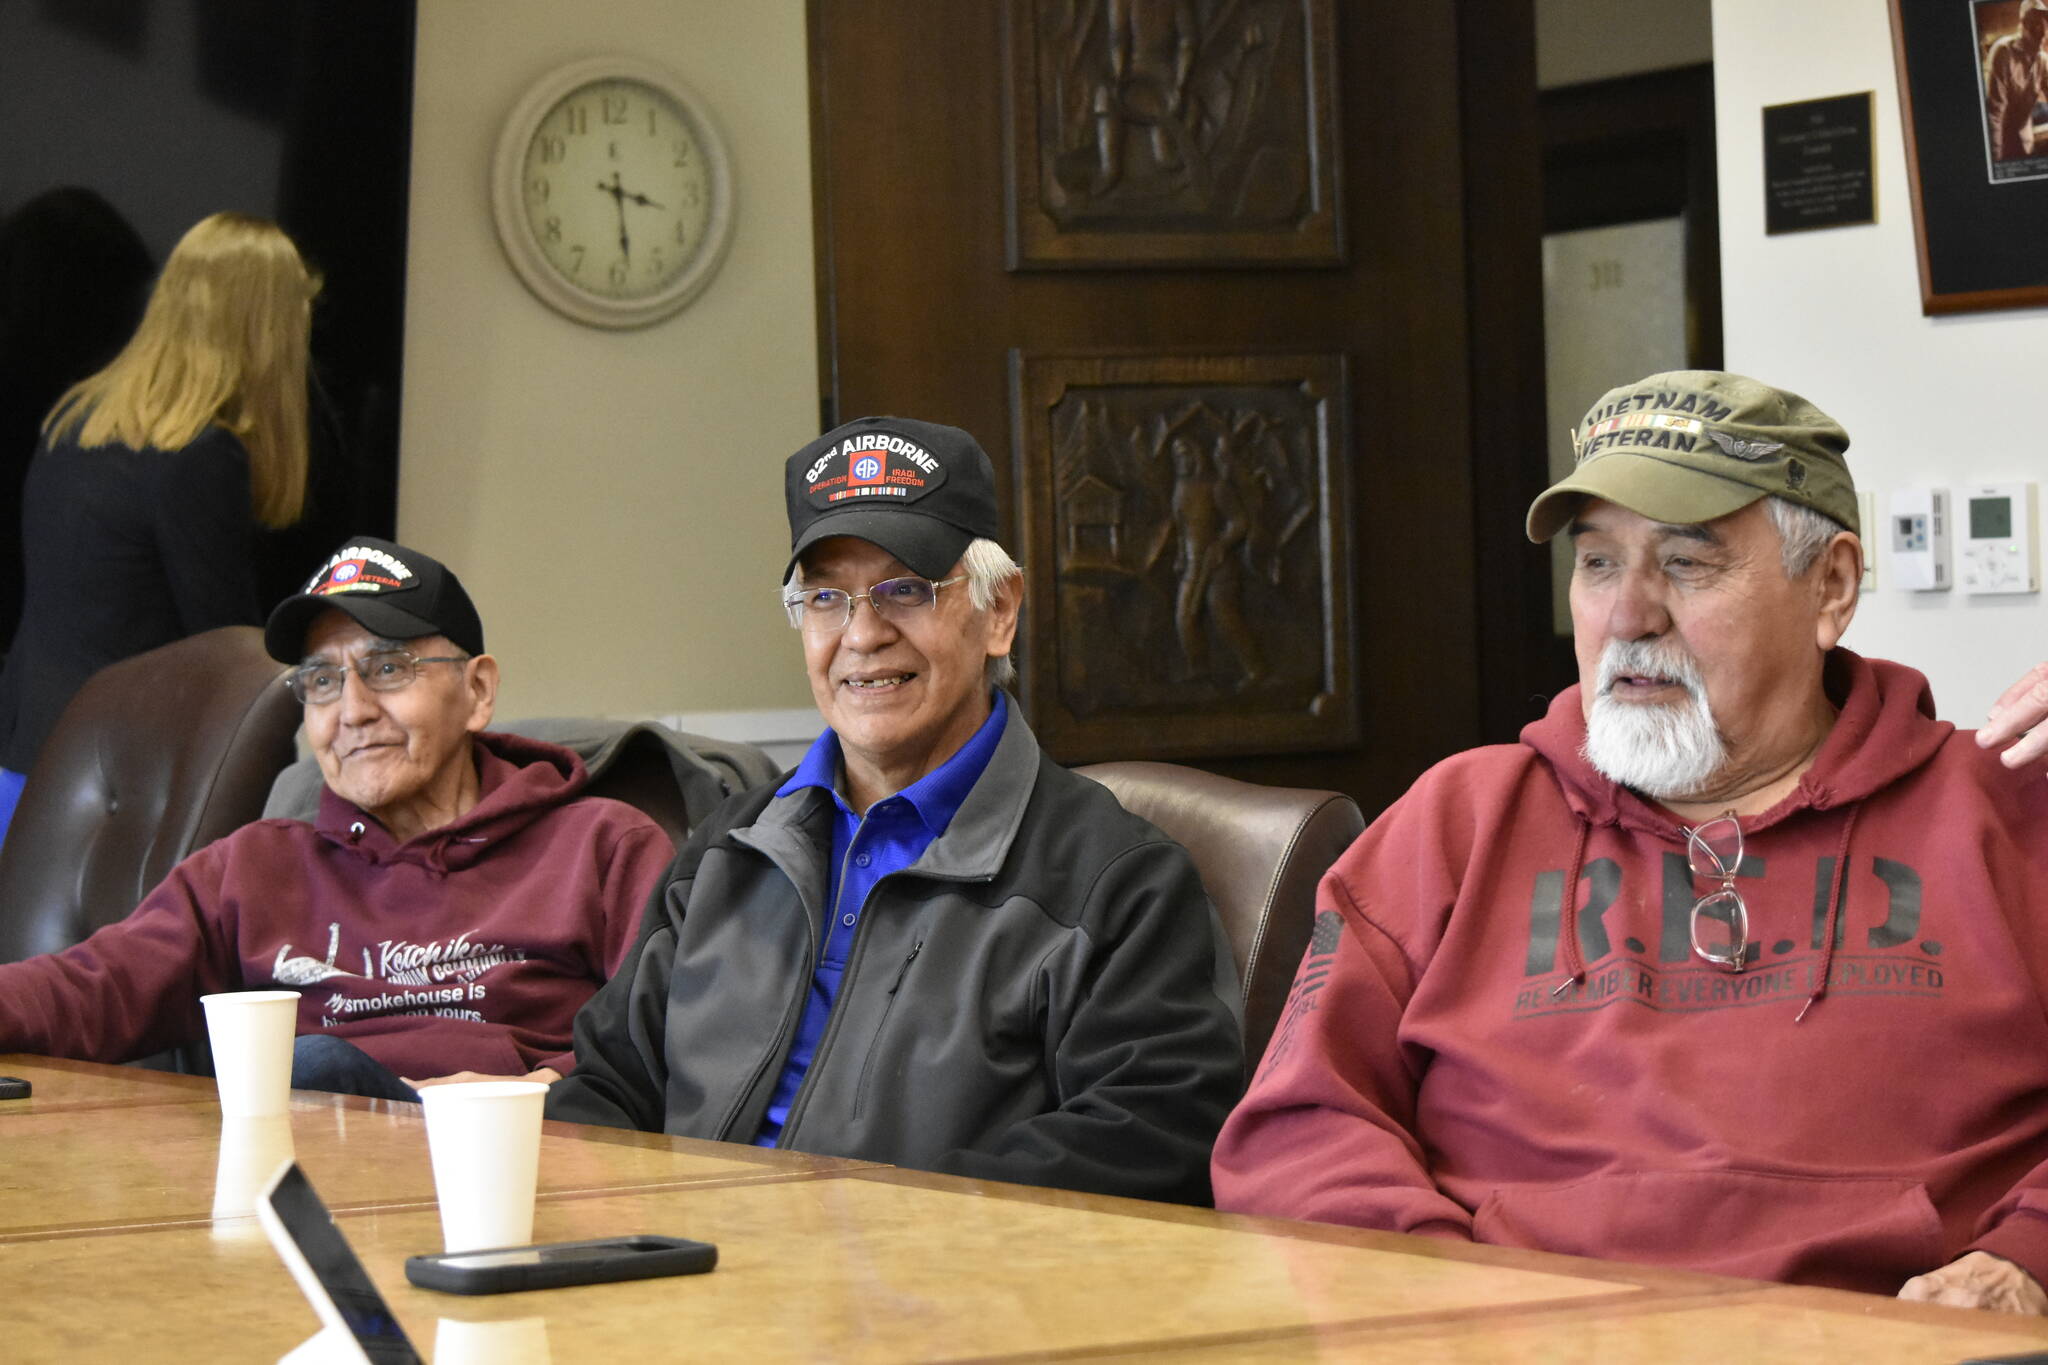 From left to right: Willard Jackson, Dennis Jack and Bill Thomas, Alaska Native veterans from Southeast Alaska met with lawmakers at the Alaska State Capitol on Friday, April 29, to discuss their issues getting land allotments from the federal government. Jackson and Thomas are veterans of the Vietnam War who are eligbile for land allotments, but no lands are available in Southeast Alaska, and veterans are frustrated by the lack of action. (Peter Segall / Juneau Empire)